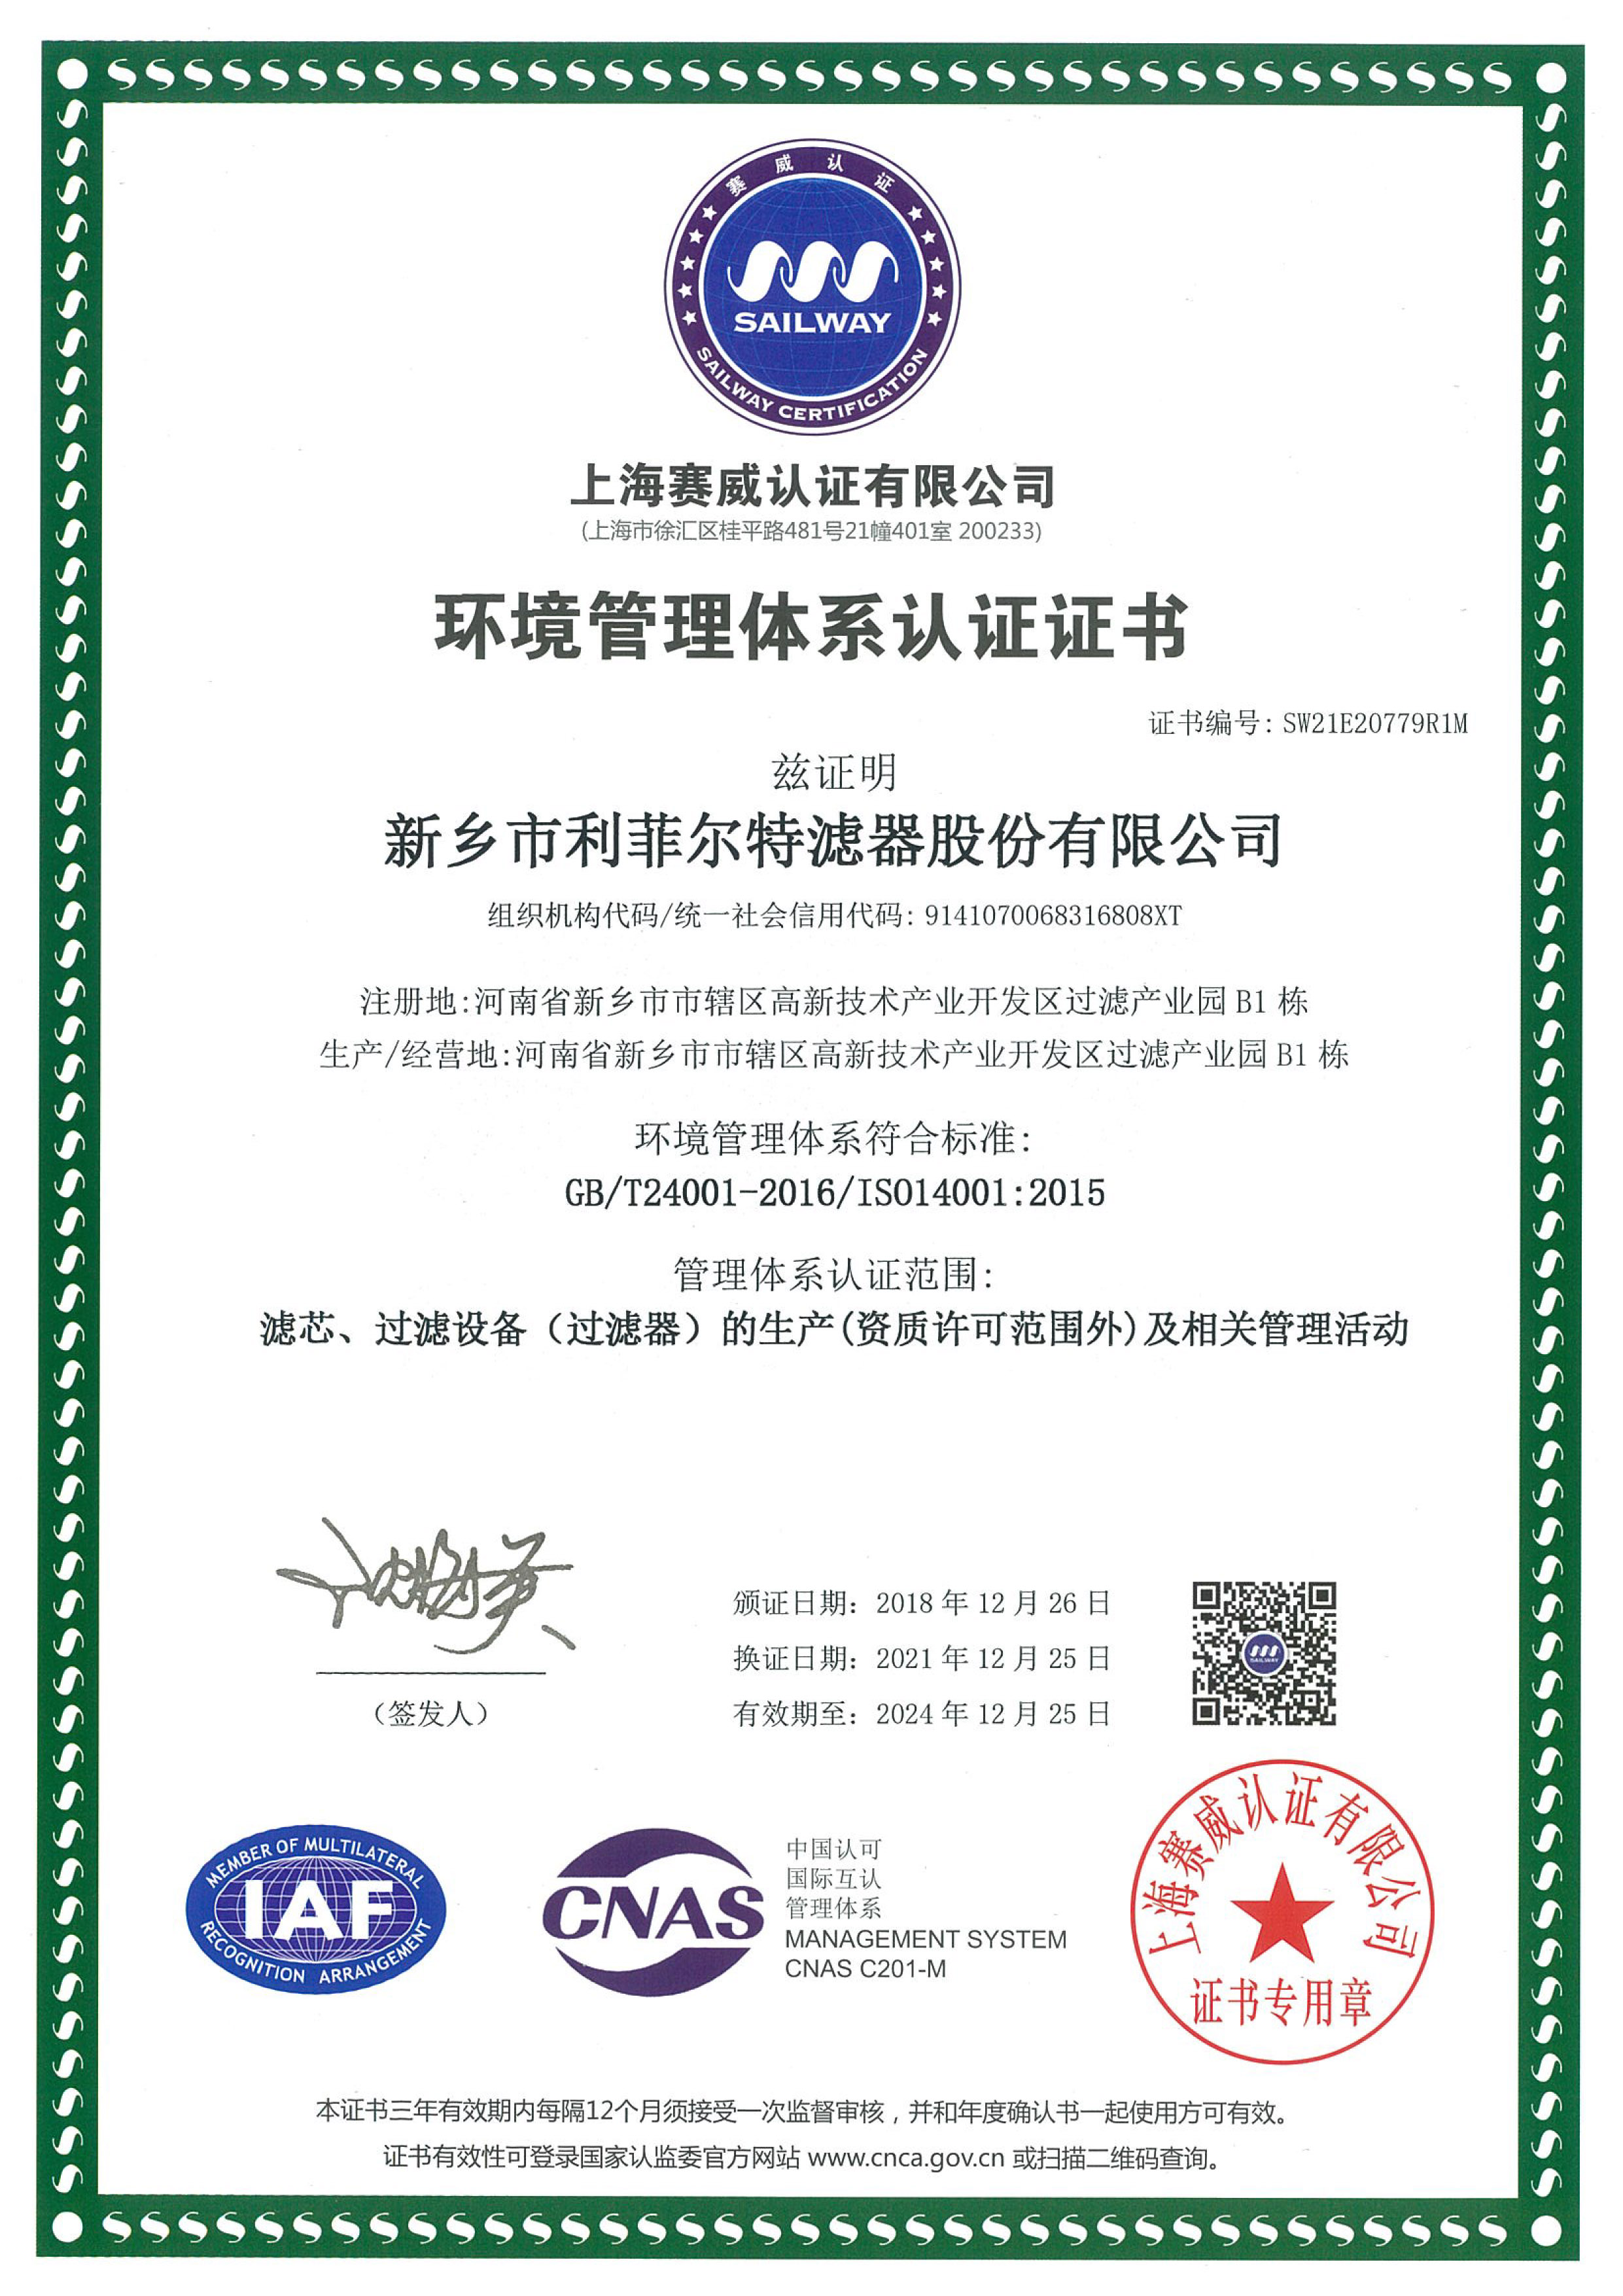 Honorary Certificate: Environmental Management System Certificate